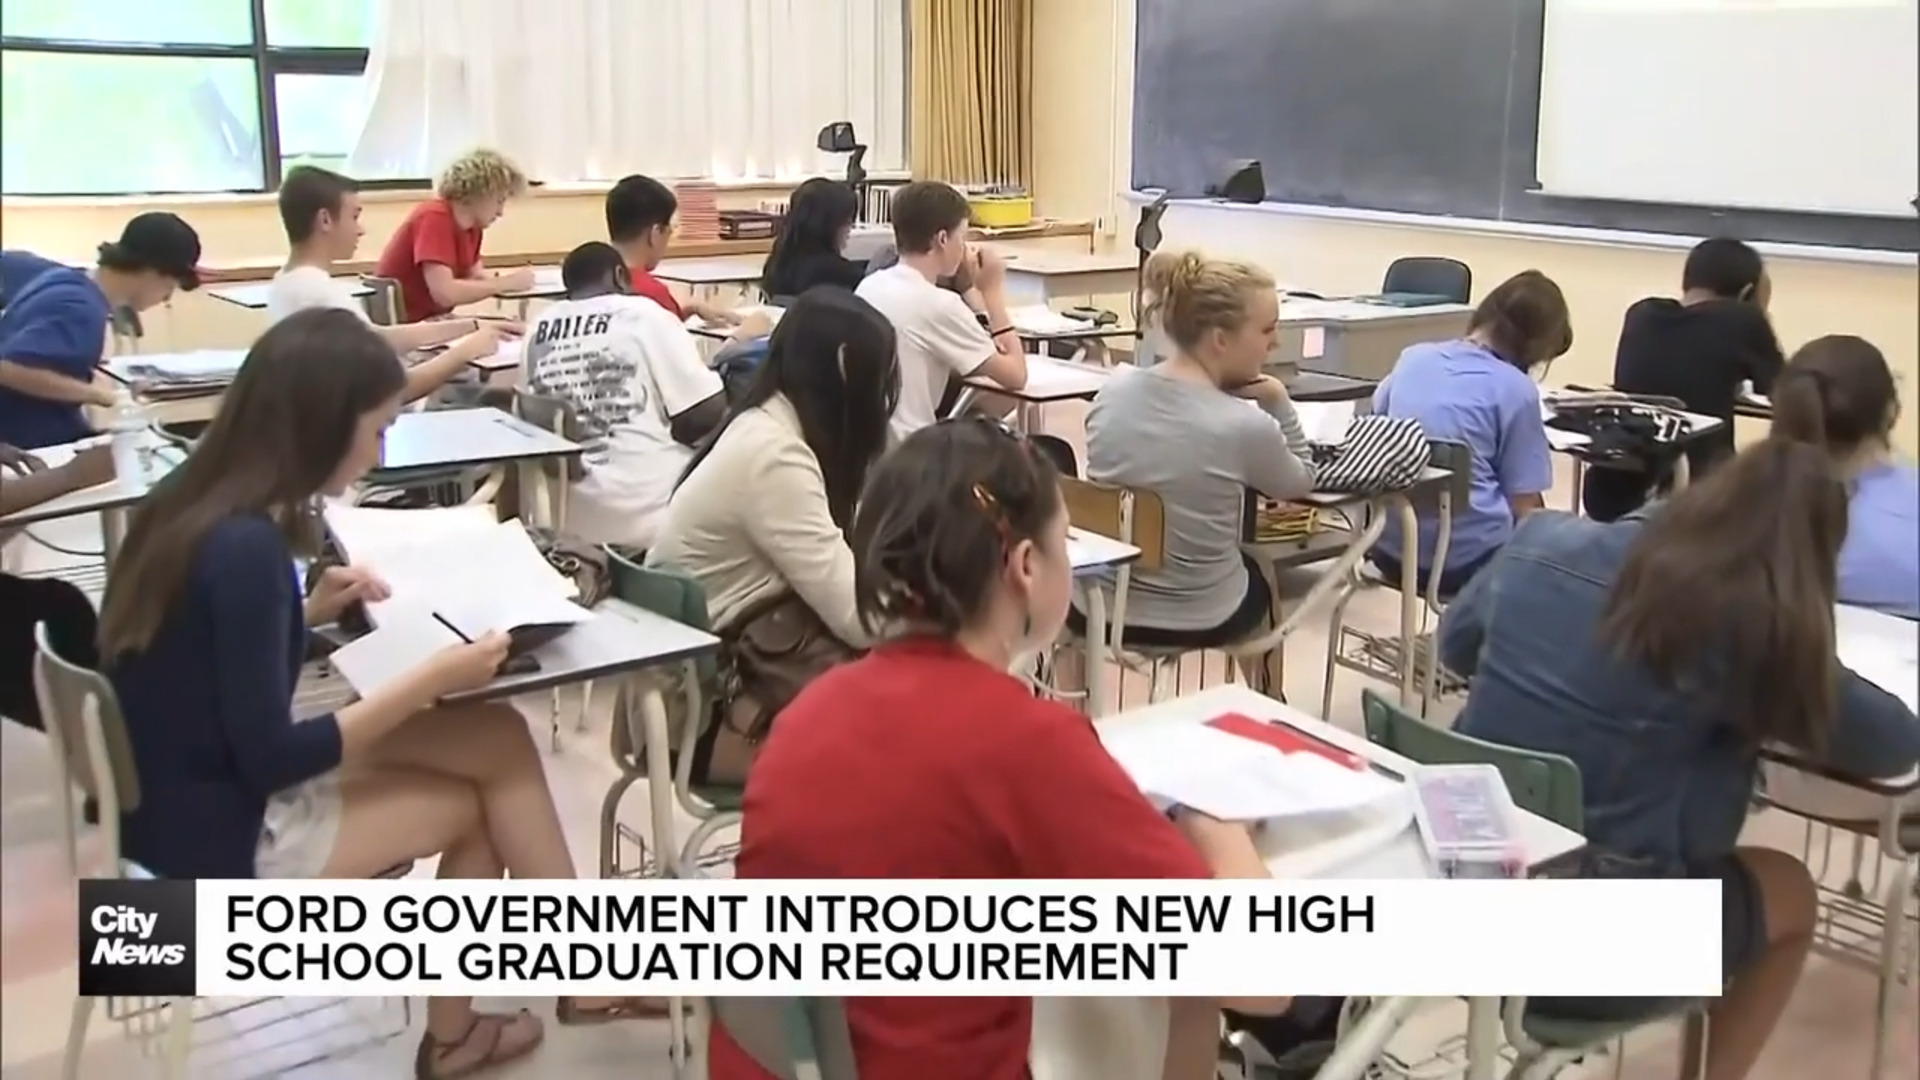 Ford government introduces new graduation requirement for high school students